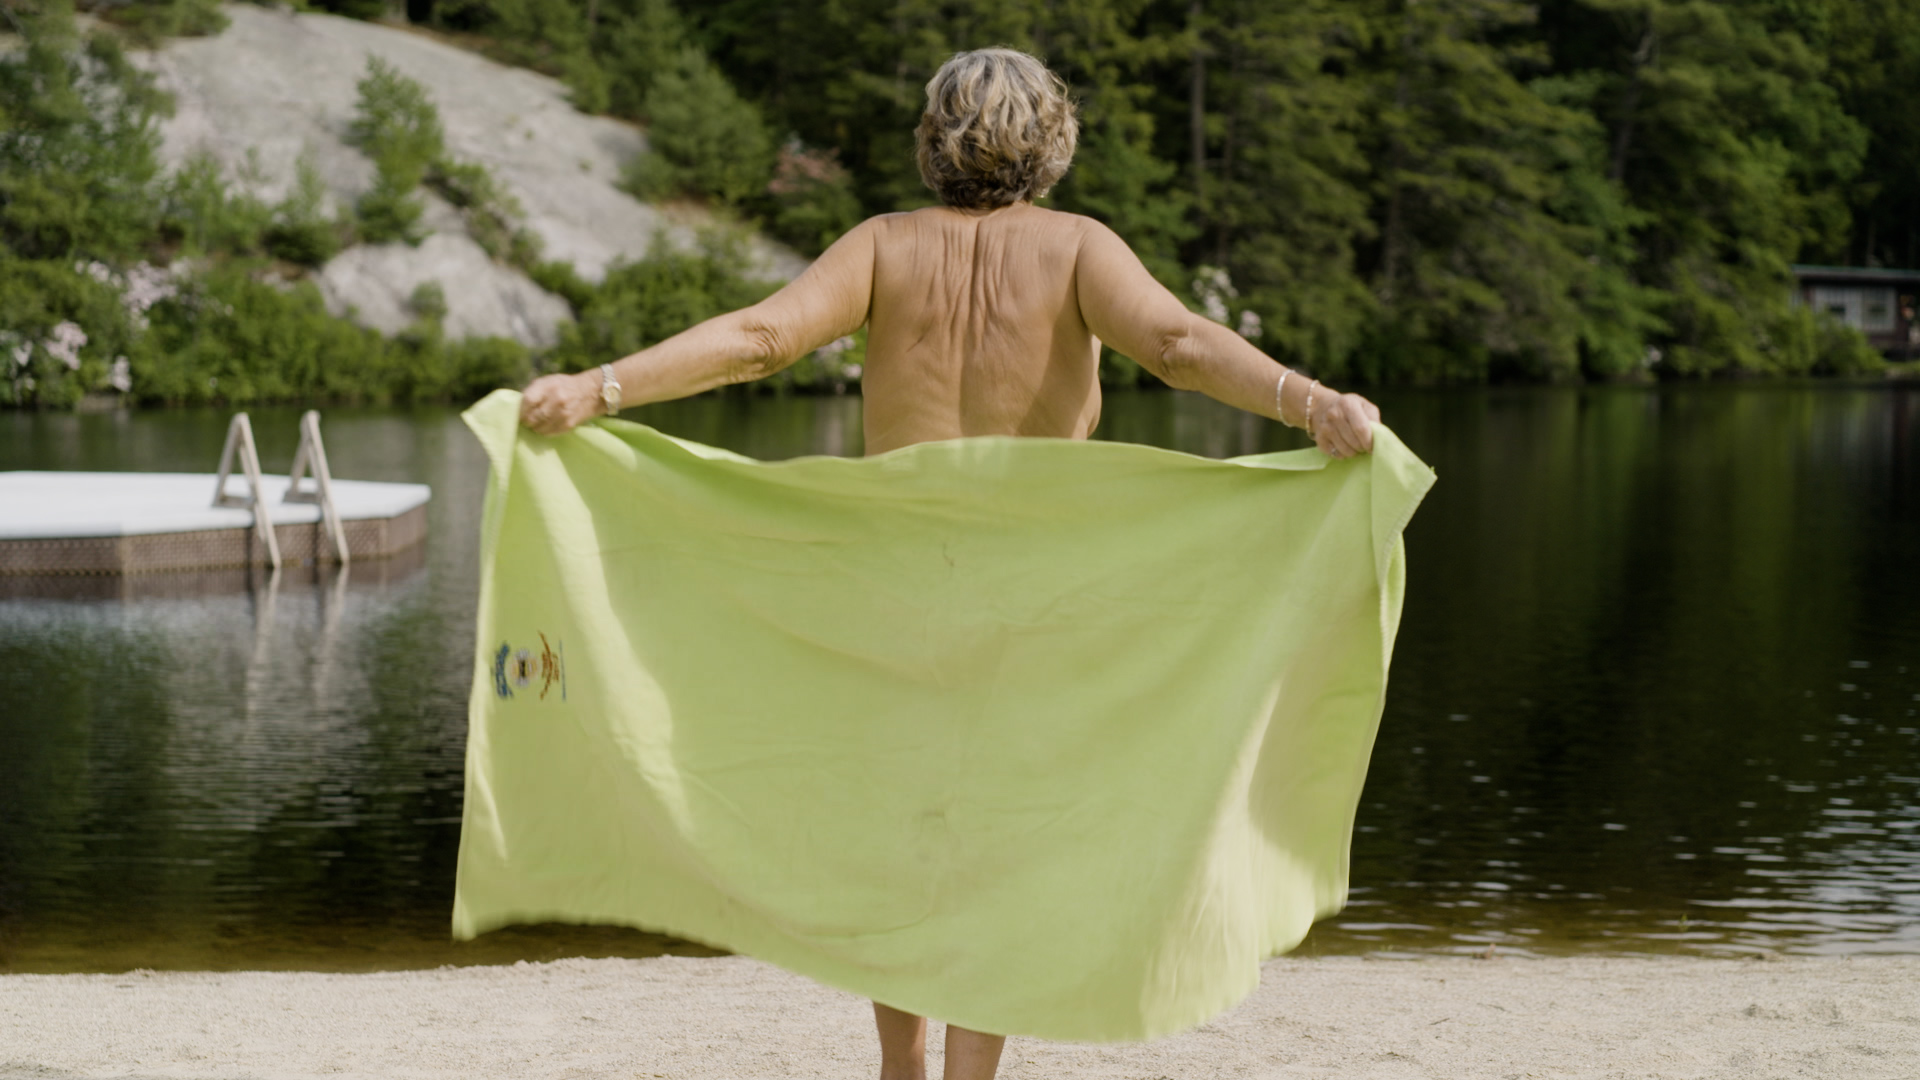 Nudist explains what you should definitely not do at a nude beach photo